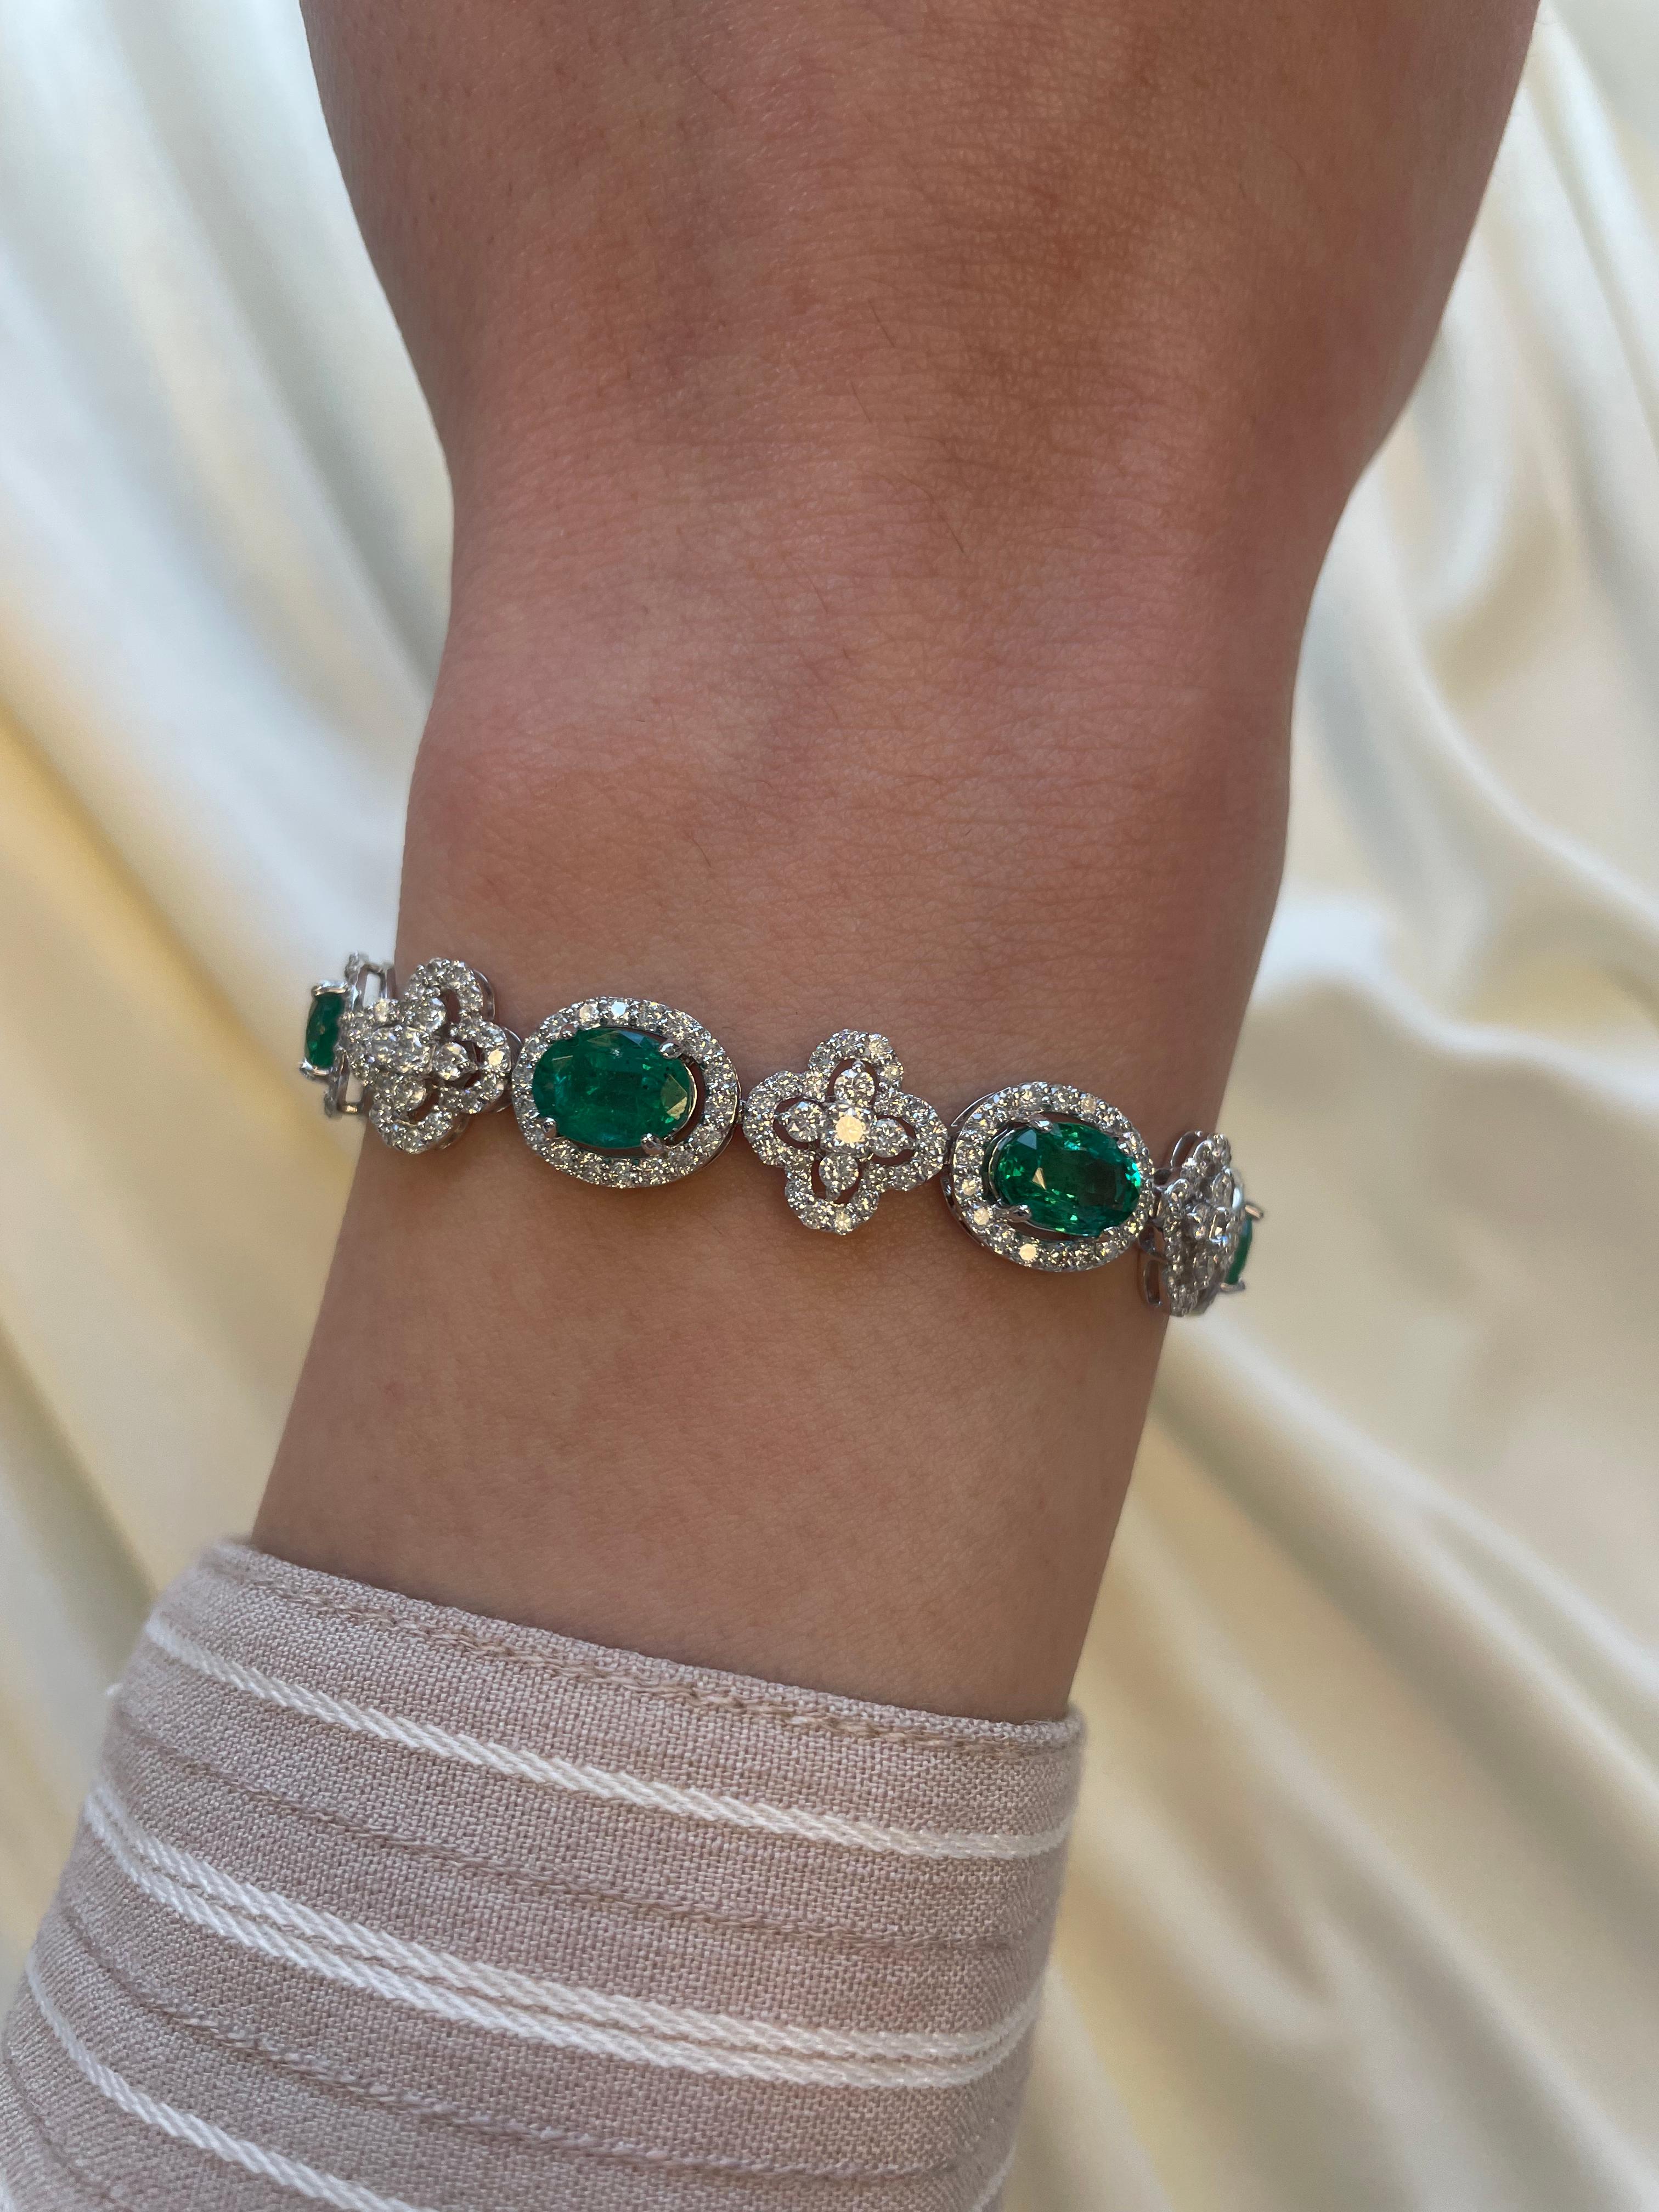 Exquisite and elegant emerald and diamond bracelet.
13.25 carats total gemstone weight.
8 oval cut emeralds, approximately F2, 8.27 carats. Complimented by 347 round brilliant diamonds, 4.98 carats. Approximately G/H color and SI clarity. 18k white